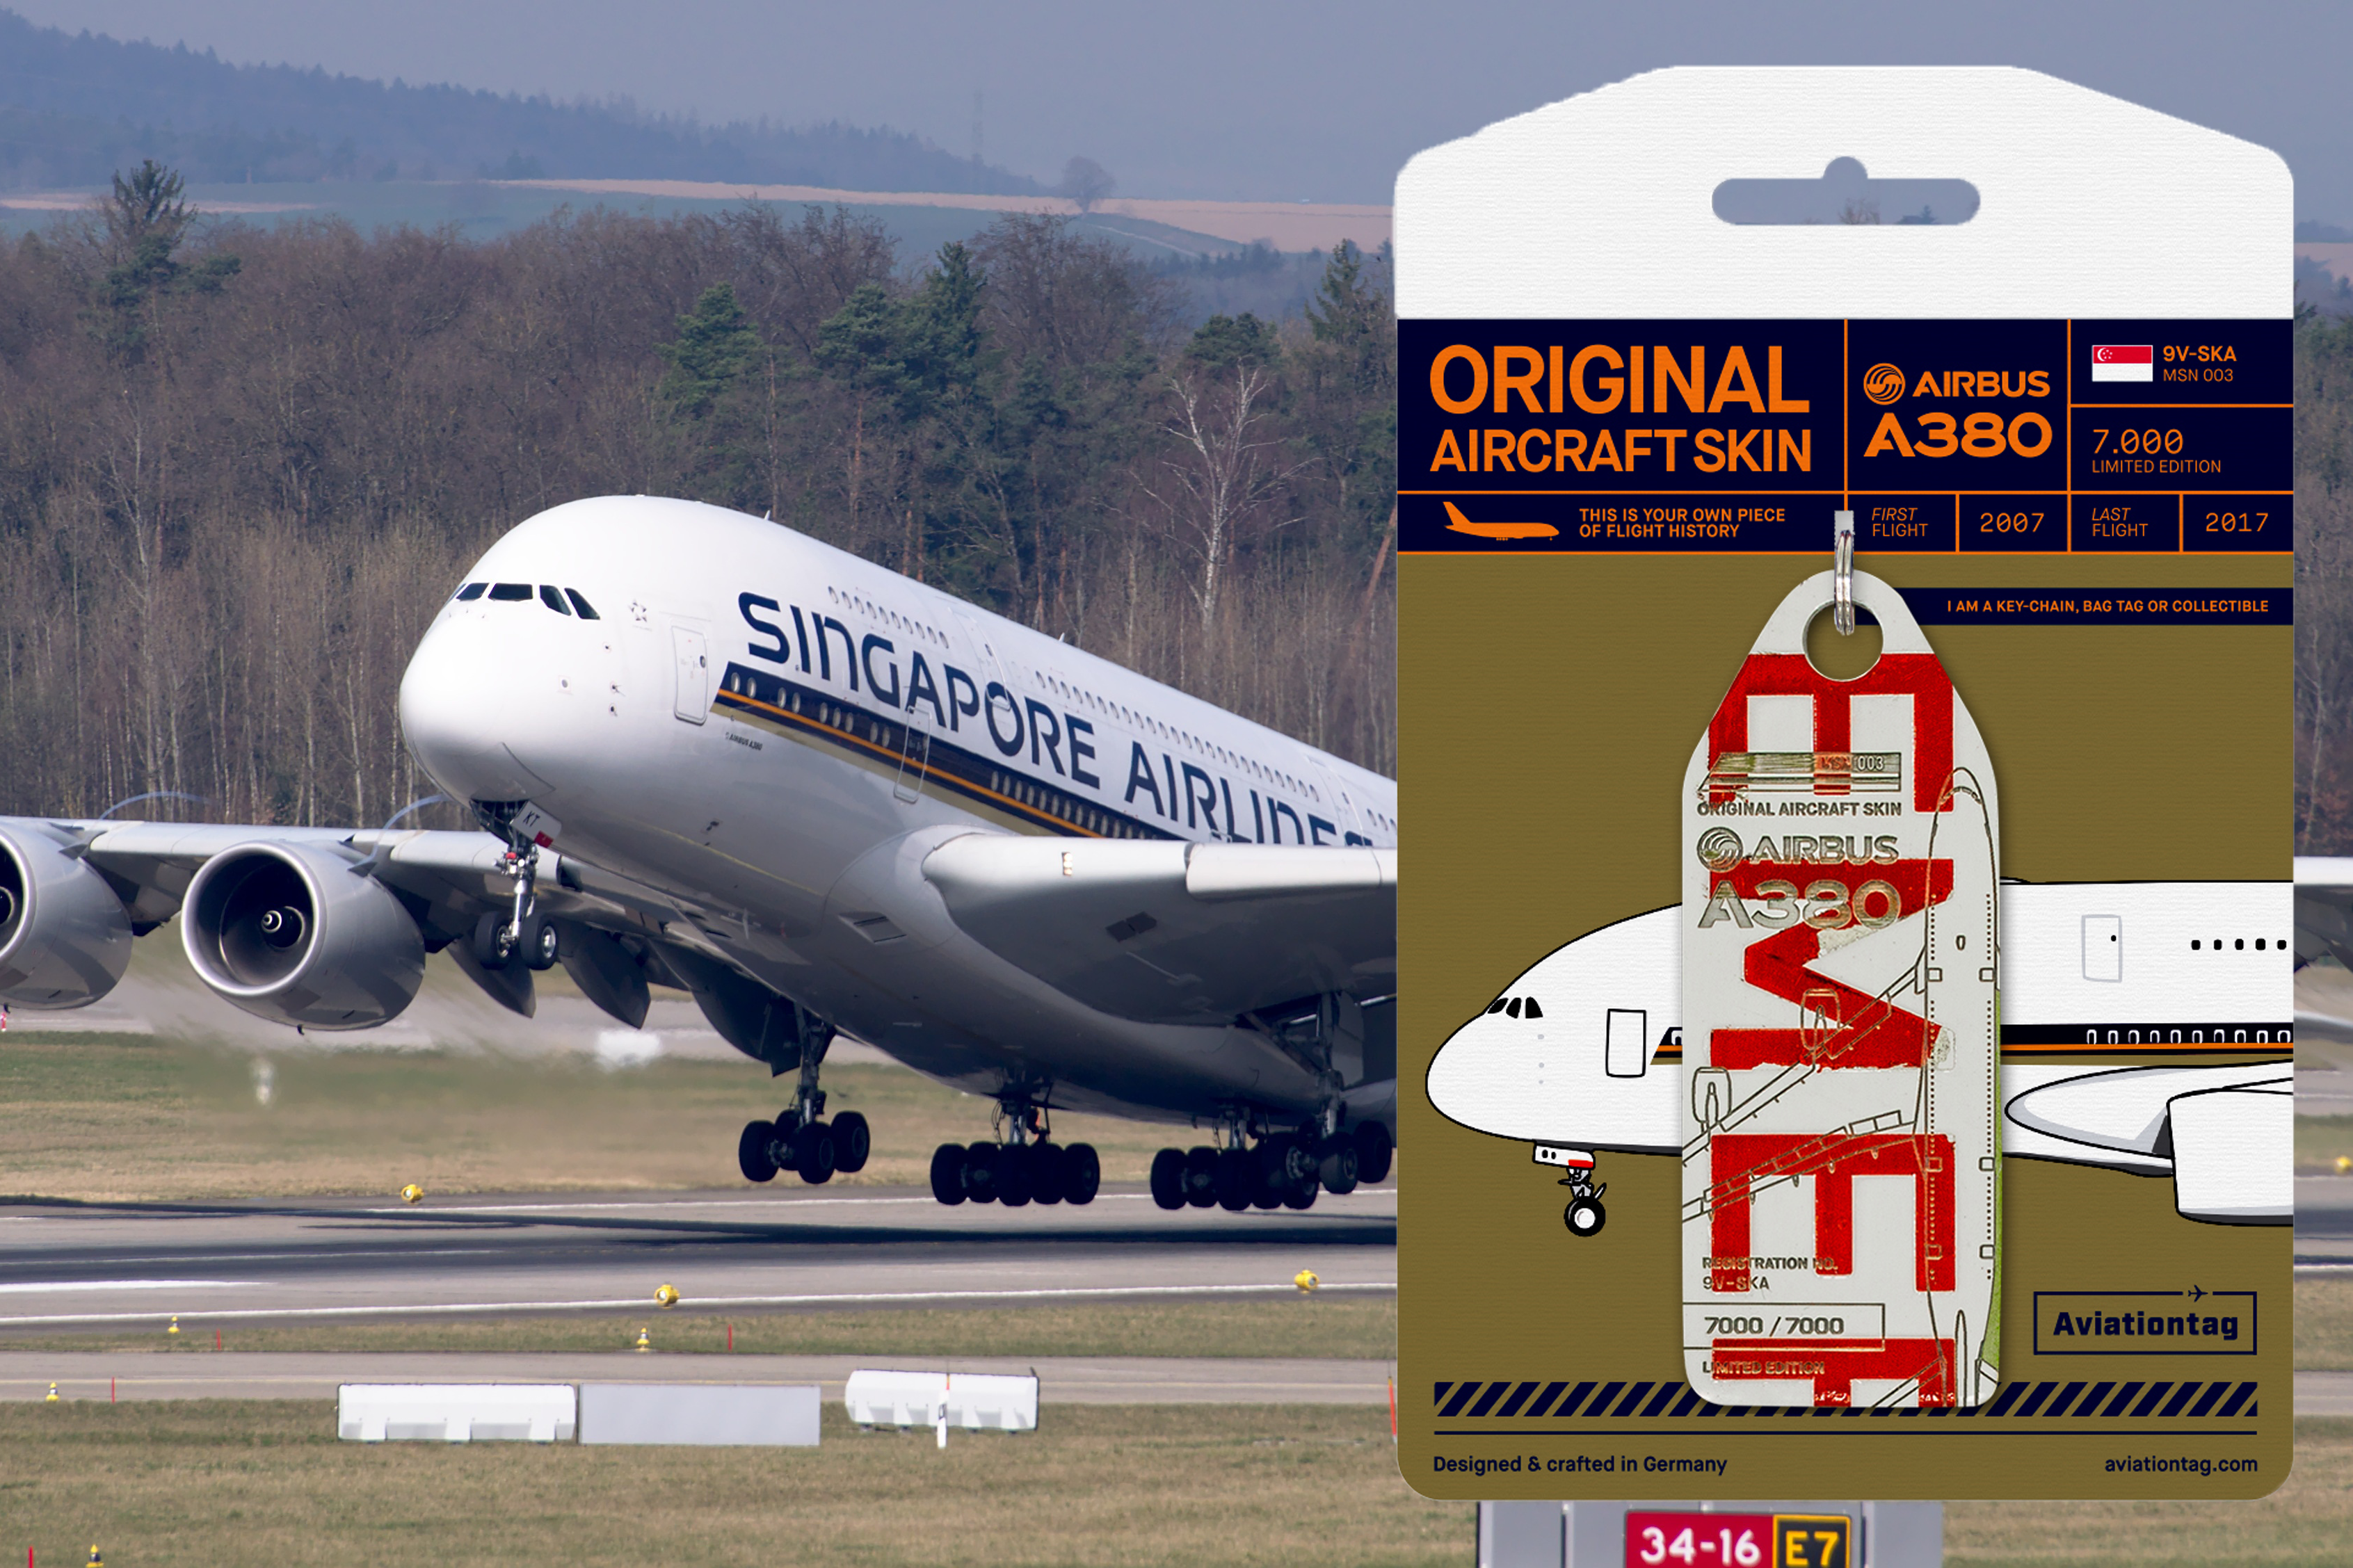 Aviationtag, Airbus A380, Skin